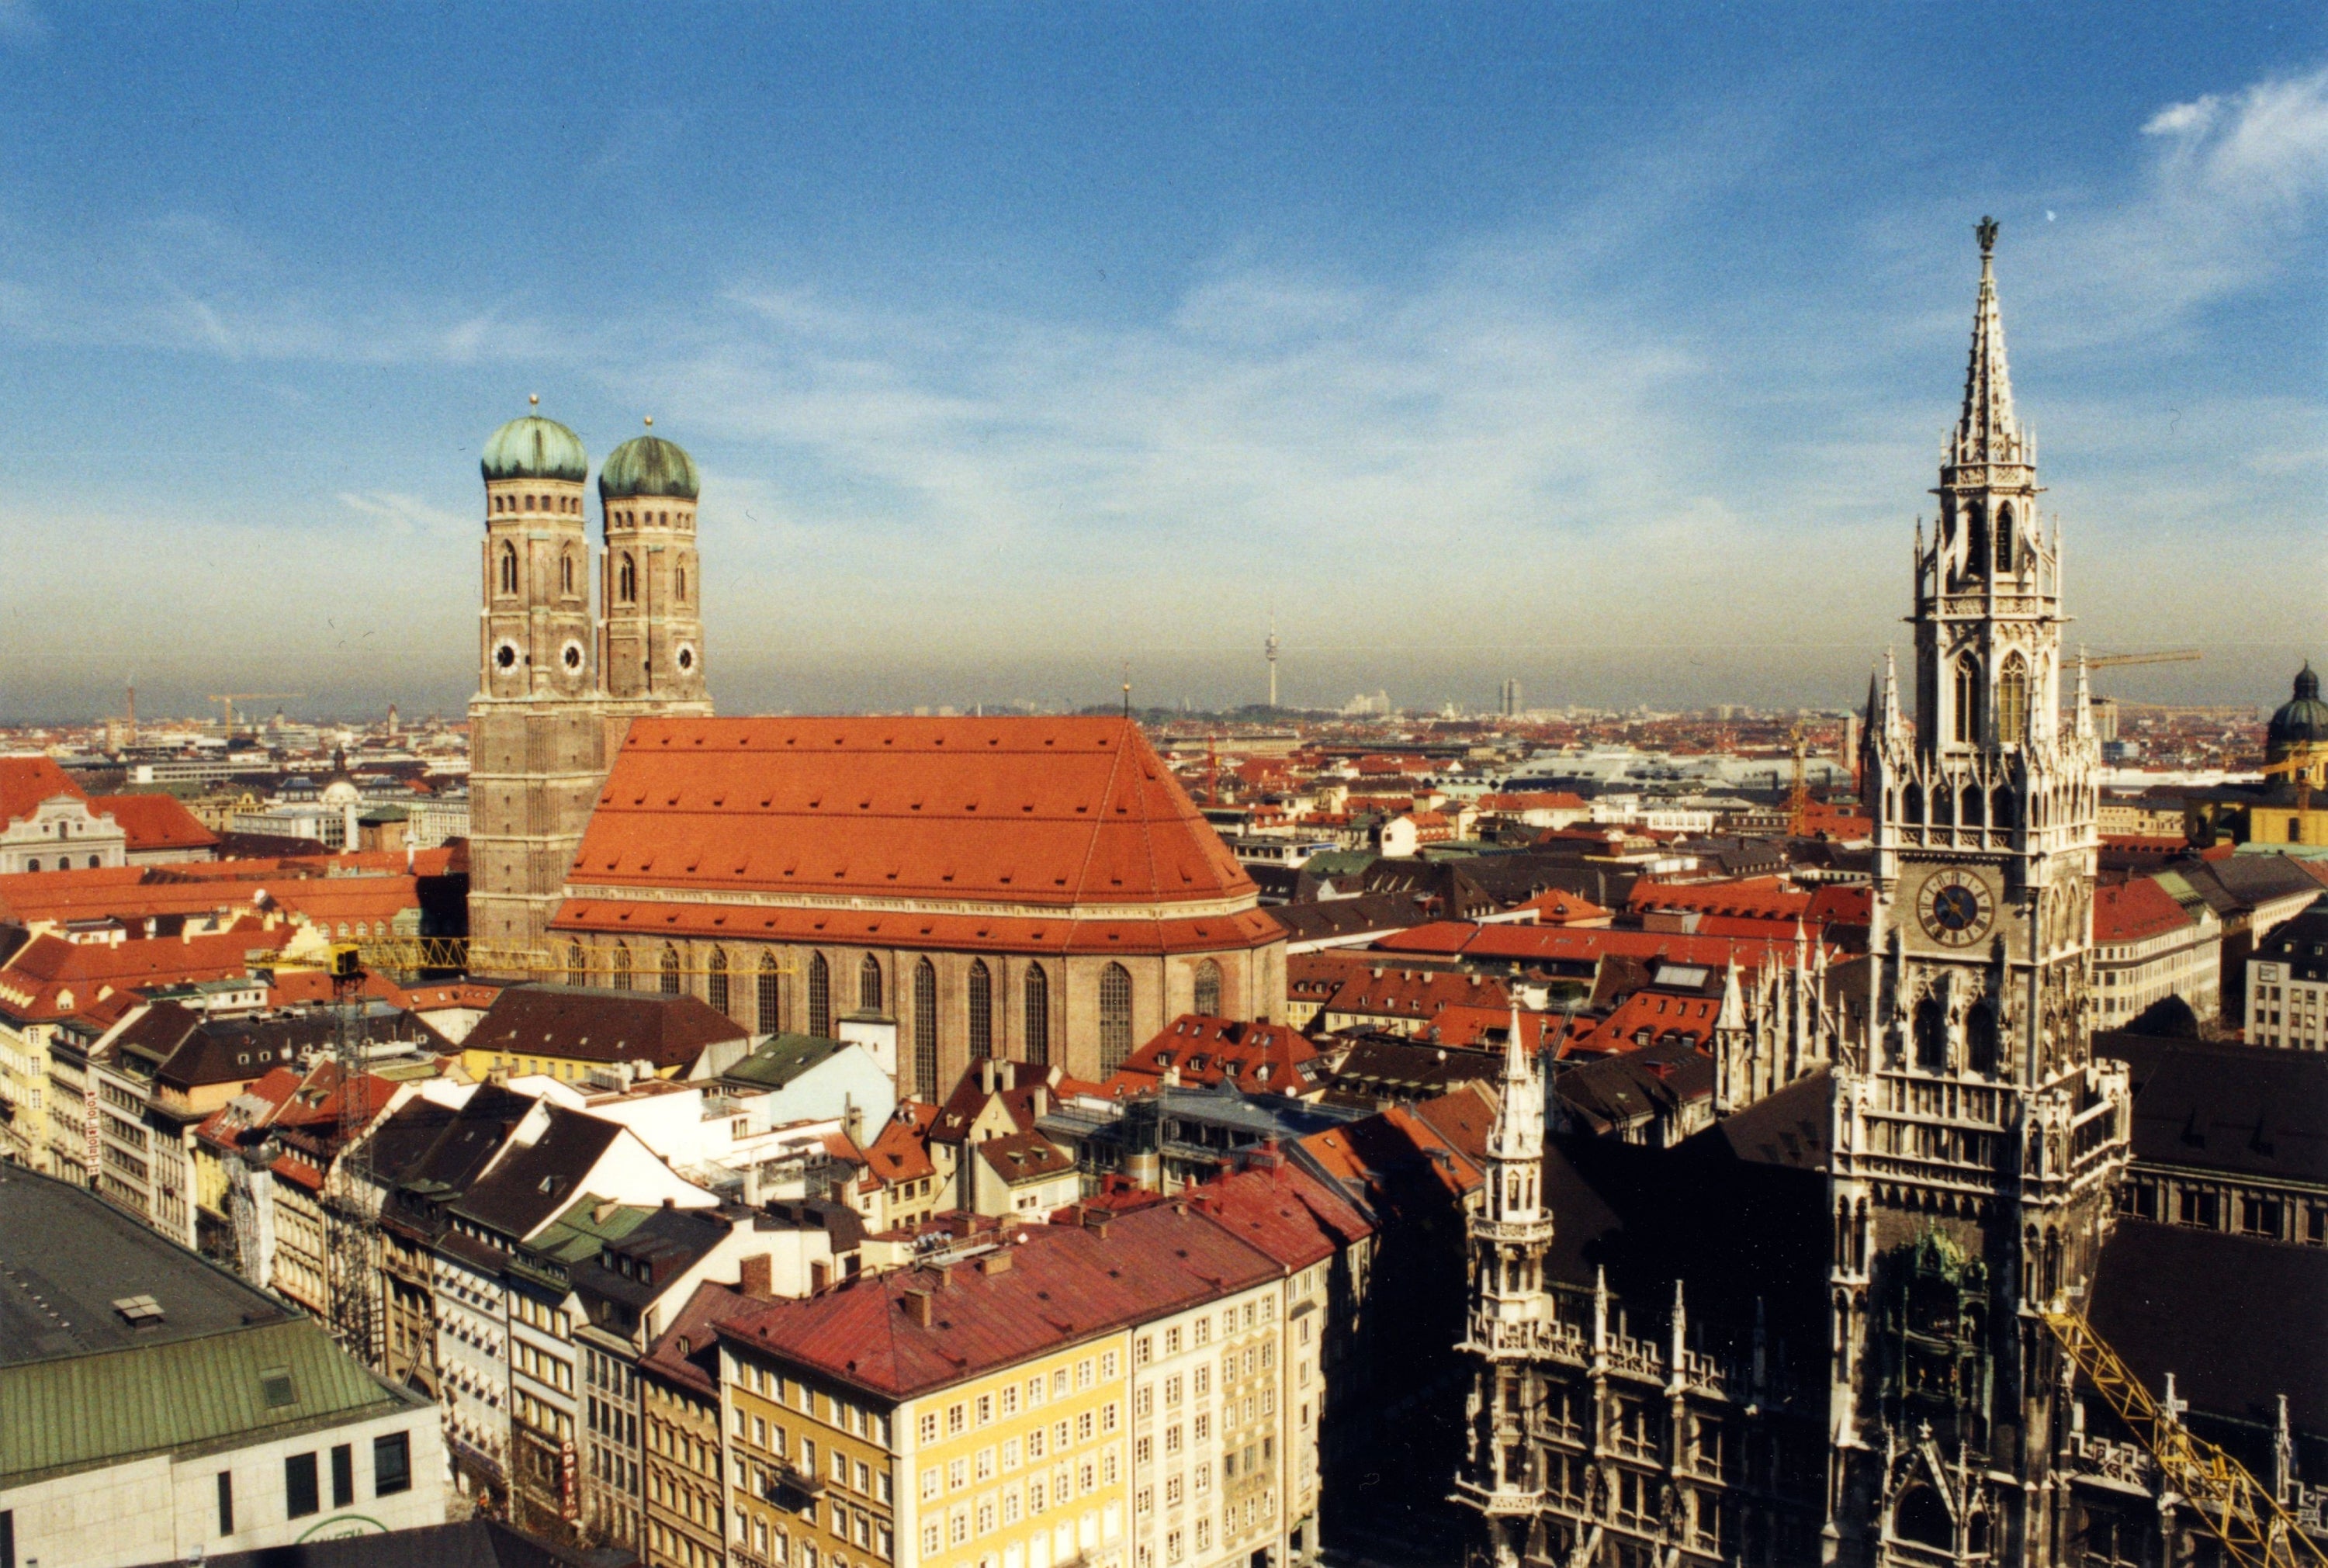 The Frauenkirche, Altes Rathaus, and other buildings that make up the Munich skyline